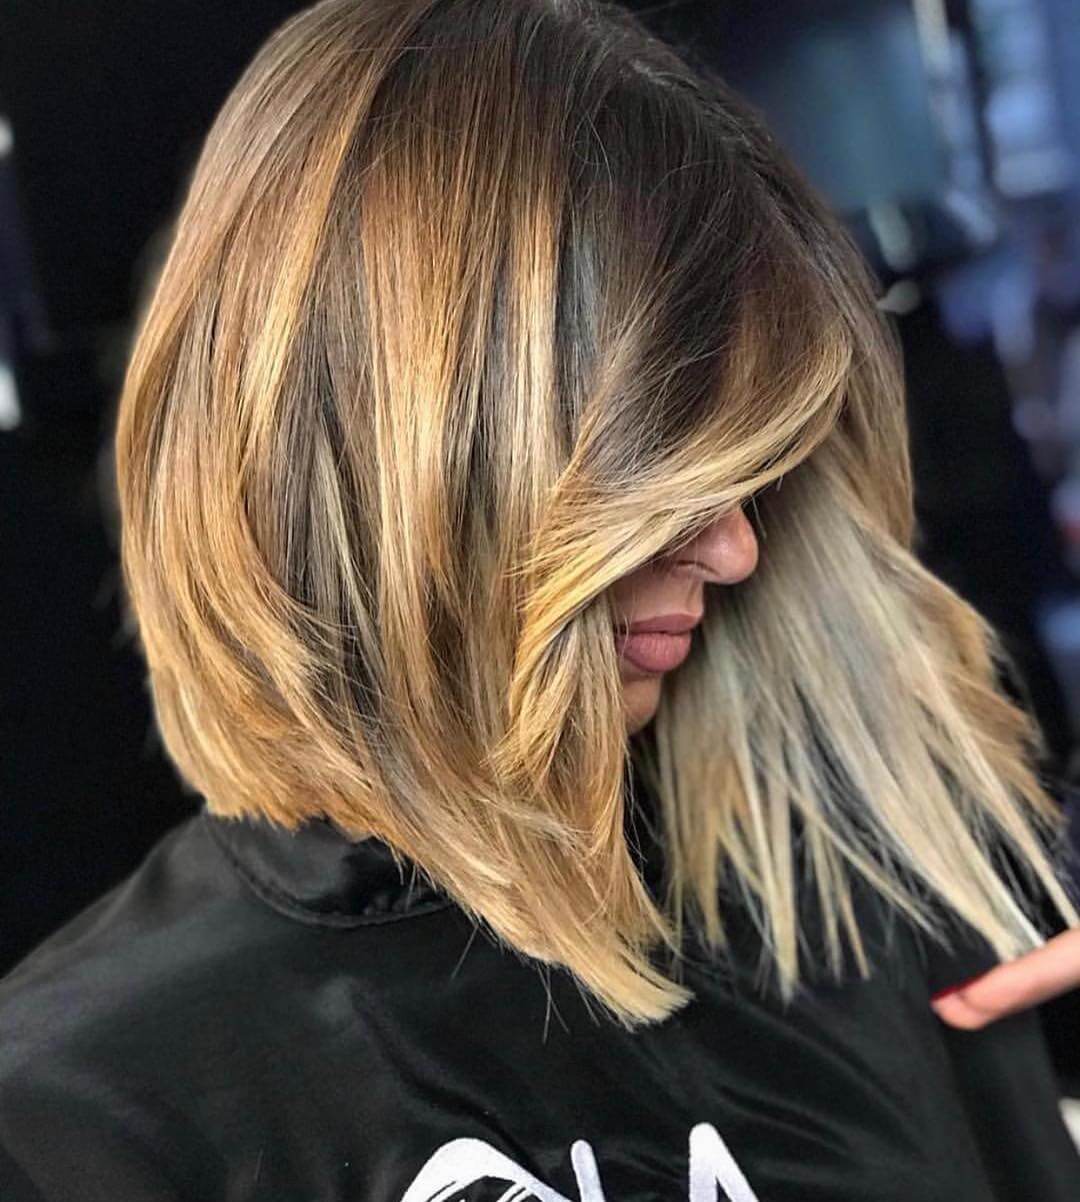 Layered Bob Haircuts Know The Variety Of Style Trends